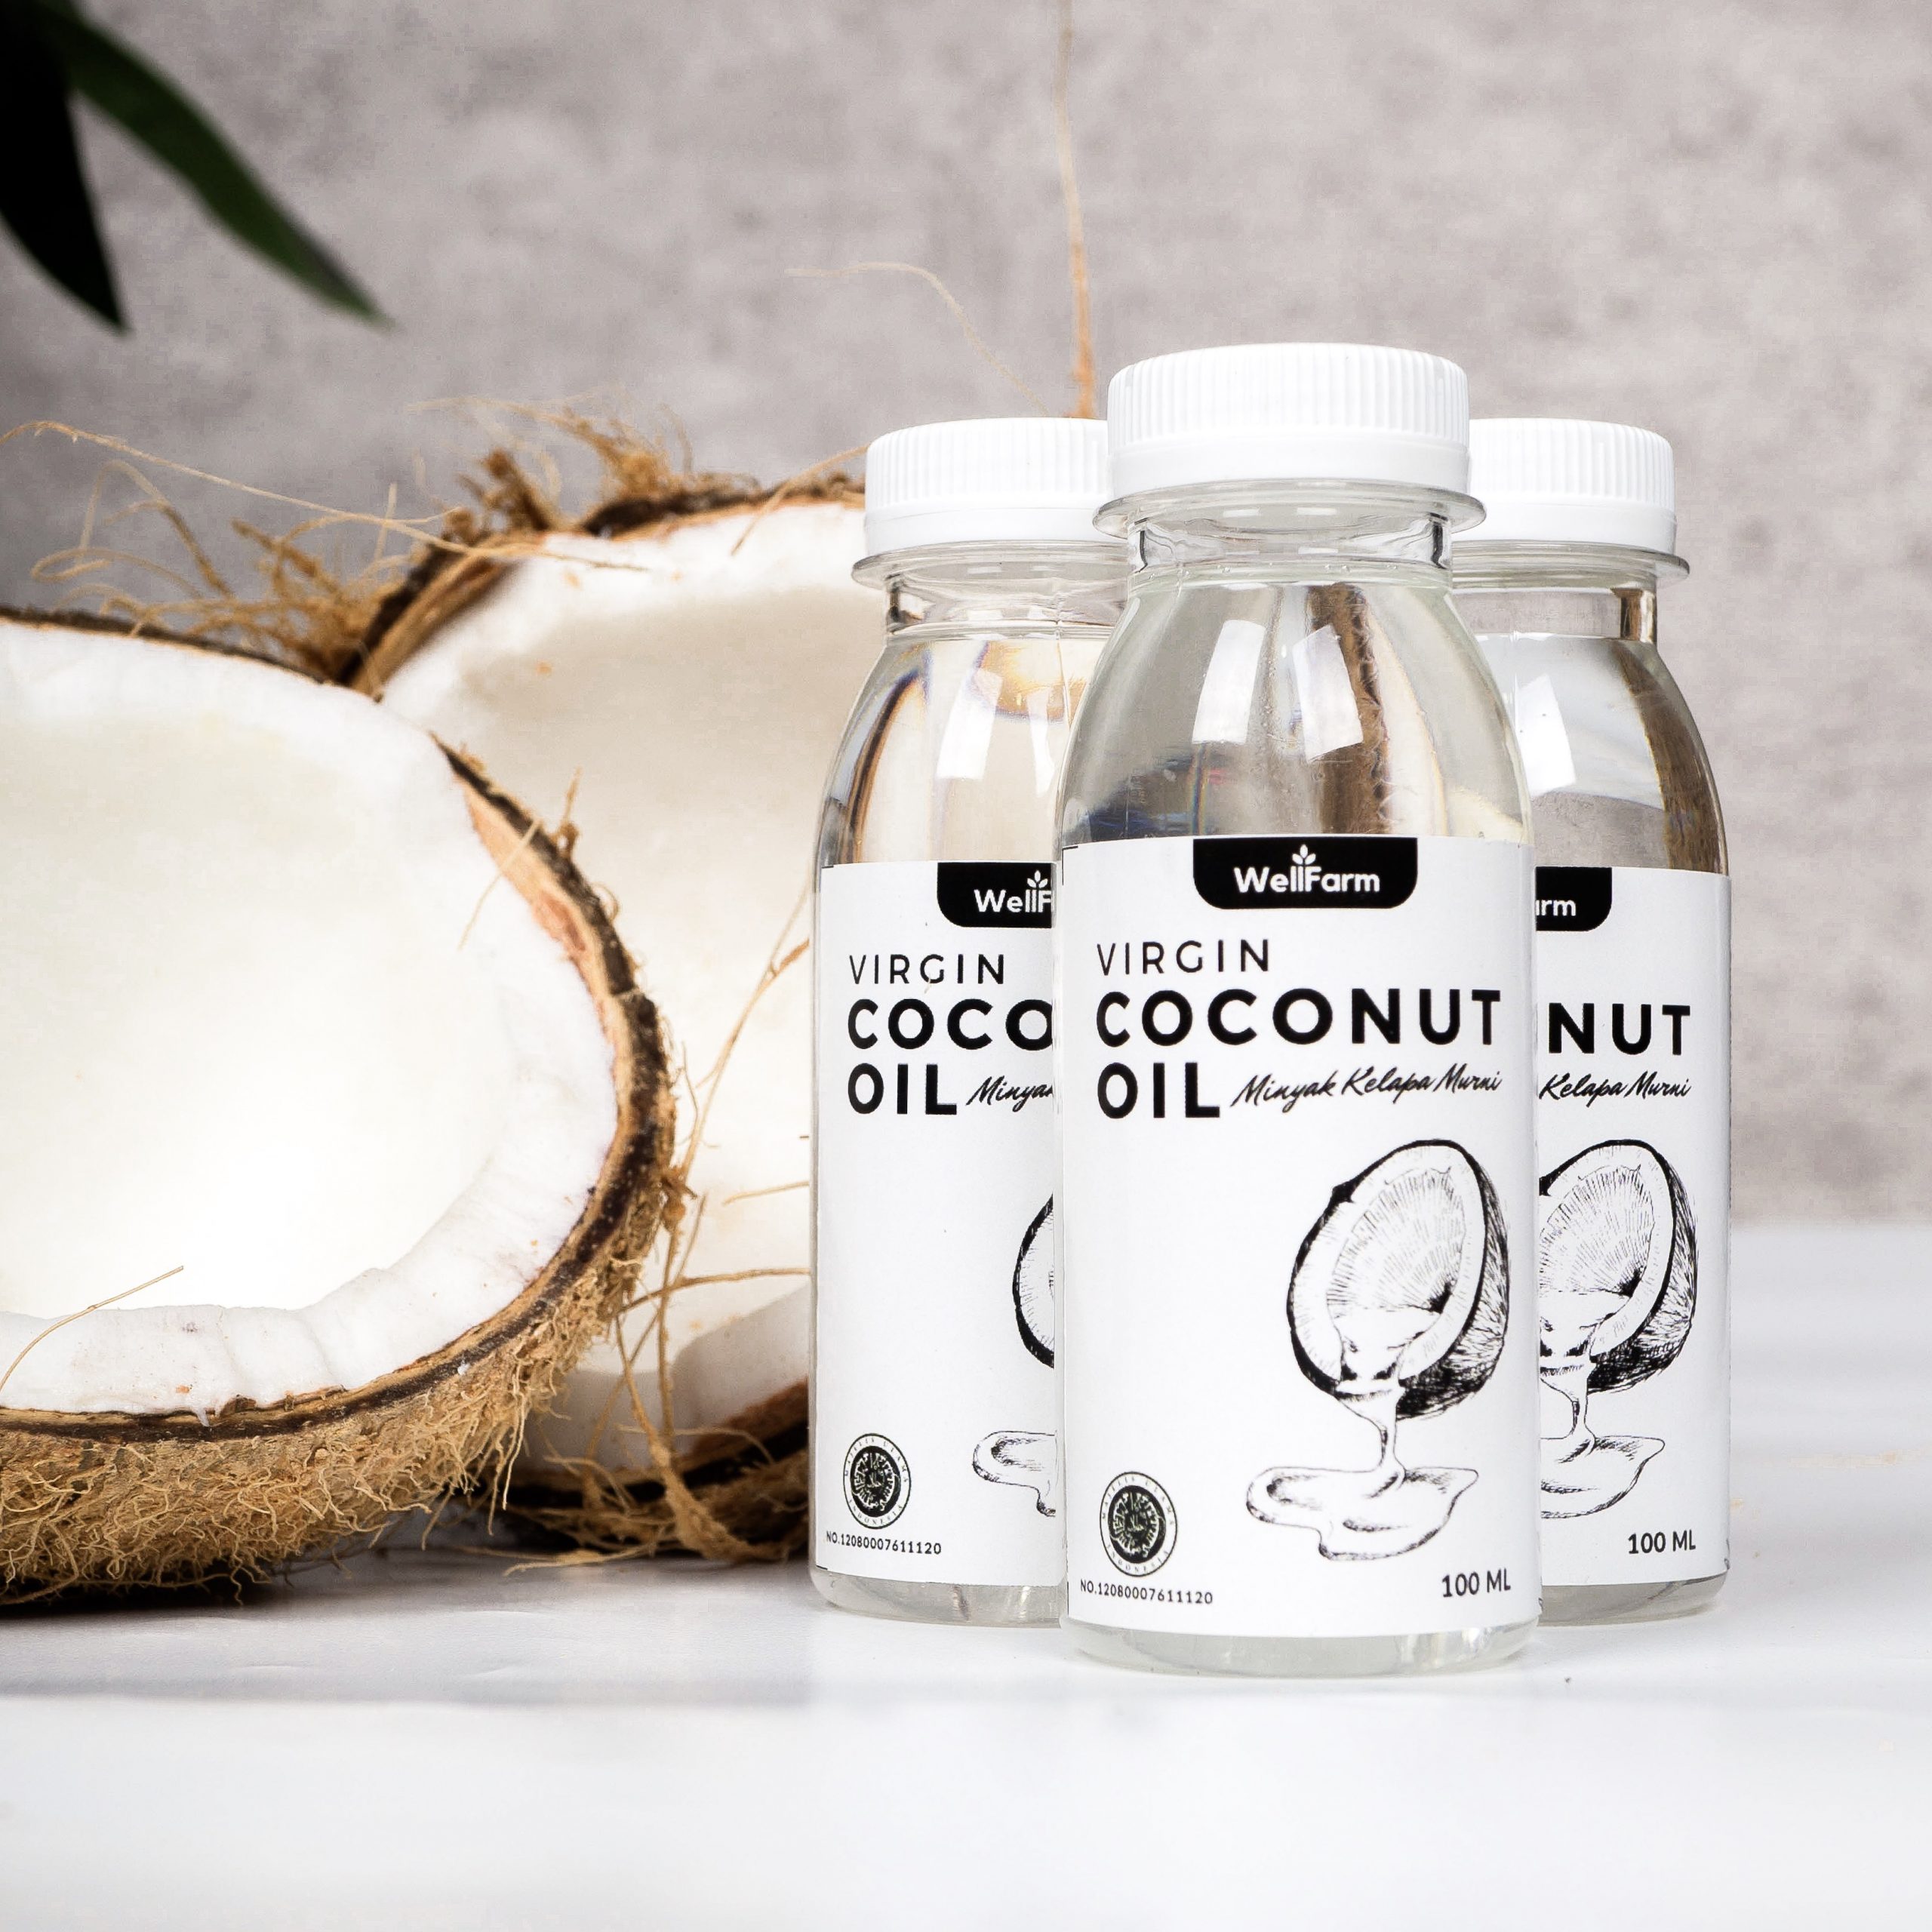 You are currently viewing Peluang Bisnis : Open Reseller VCO Virgin Coconut Oil Wellfarm